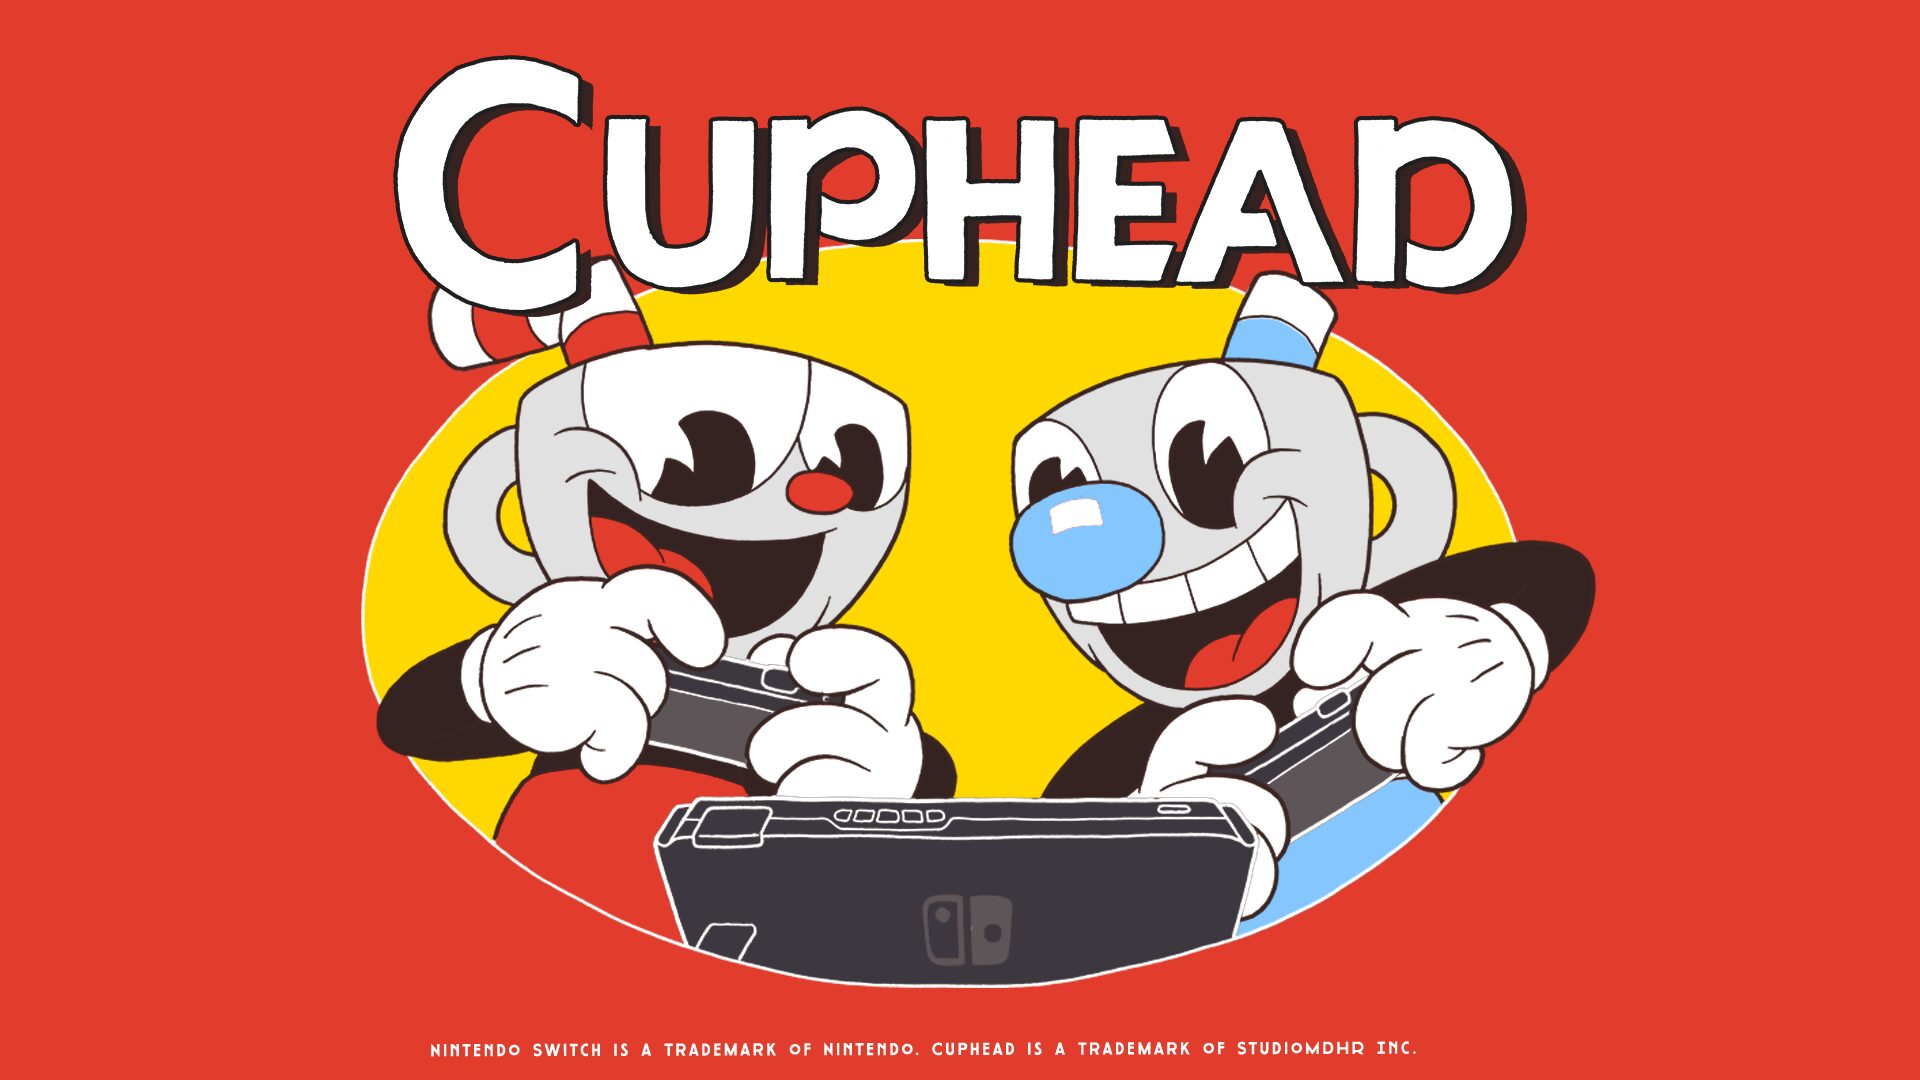 CUPHEAD hits the Nintendo Switch today